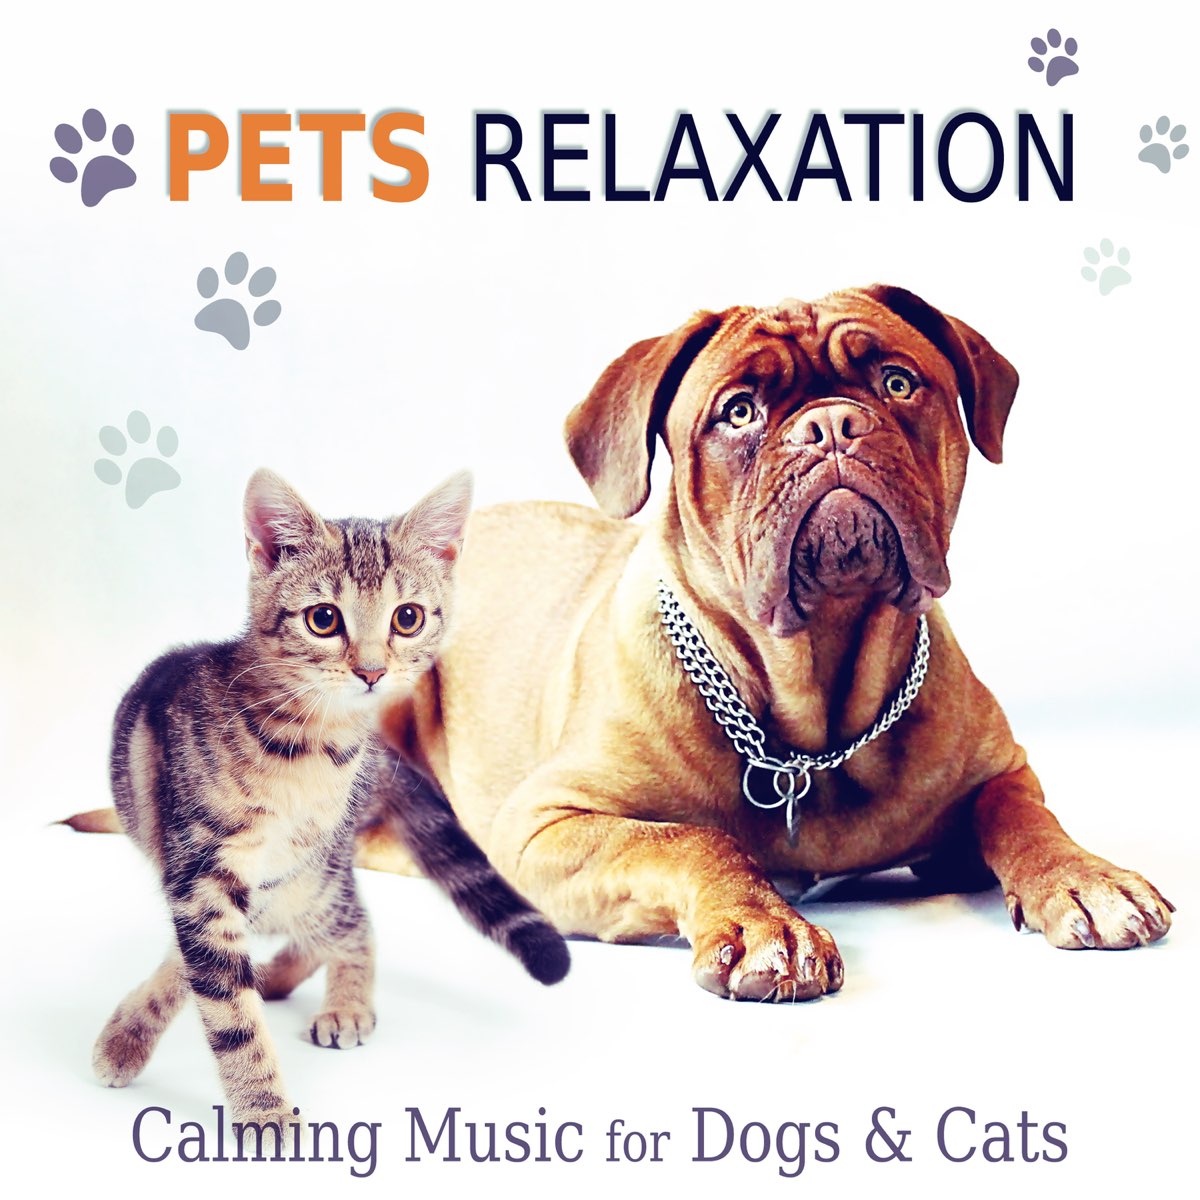 Pets музыка. Pet Academy. Songs for Pets. Pets and Music Music for Cats and friends - Vol. 2. About Pets with Song.